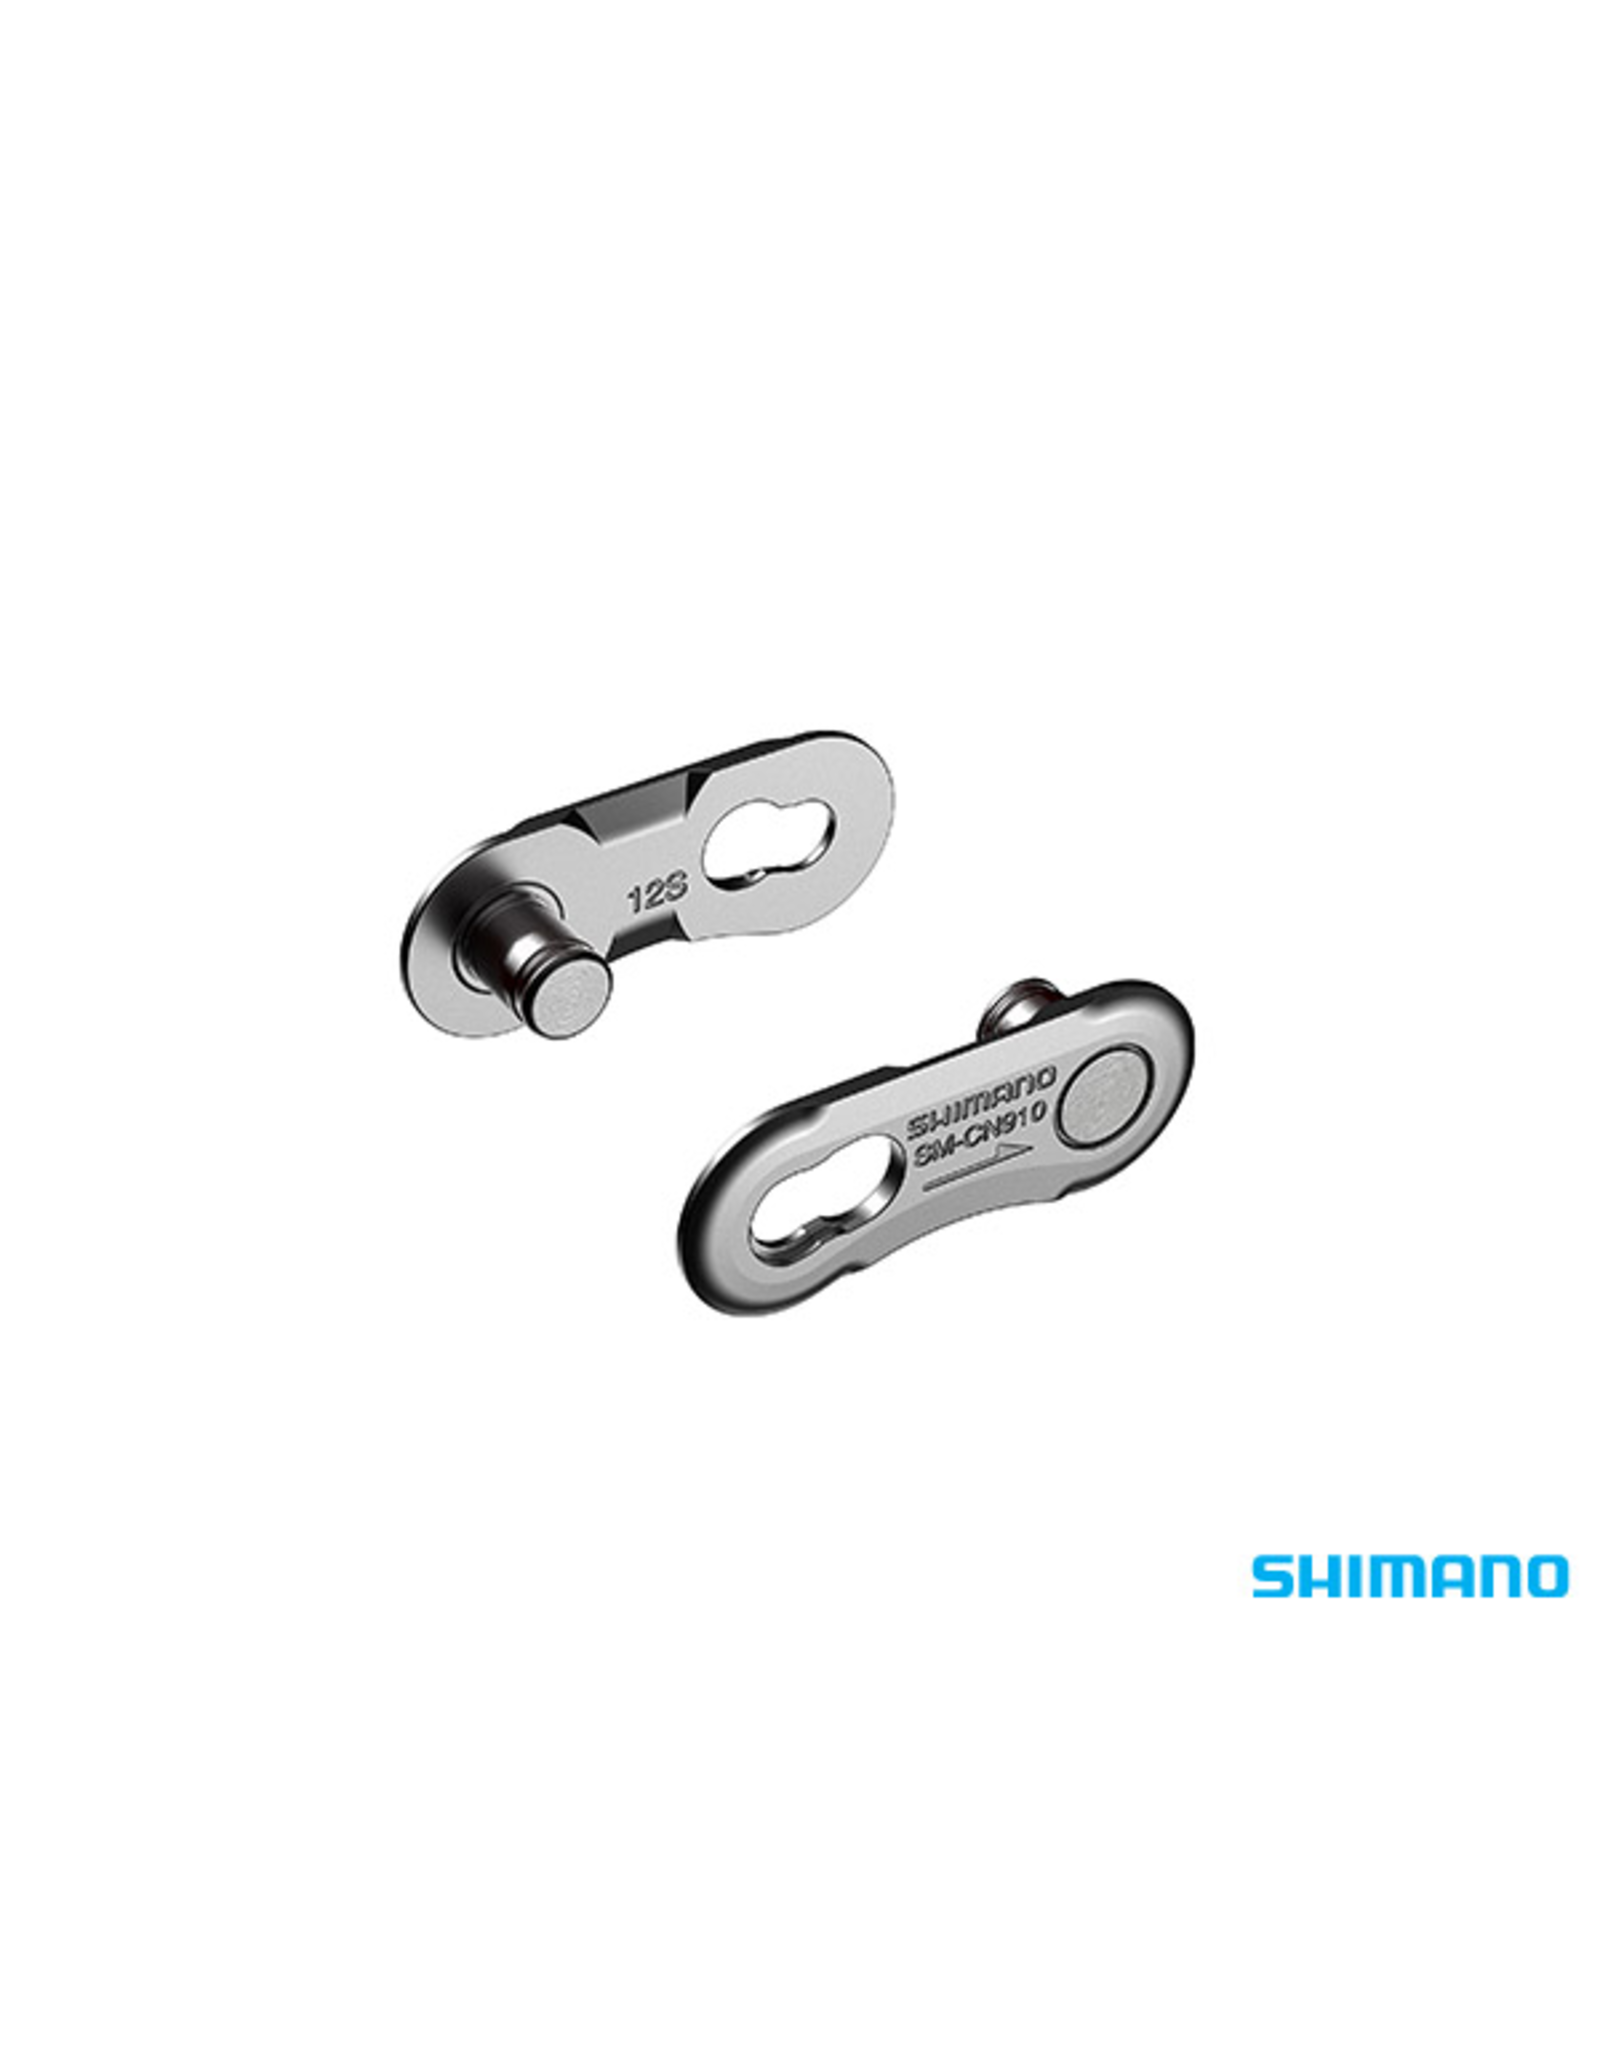 Shimano SHIMANO SM-CN910 CHAIN QUICK LINK for 12-SPEED SILVER EACH JOIN LINK